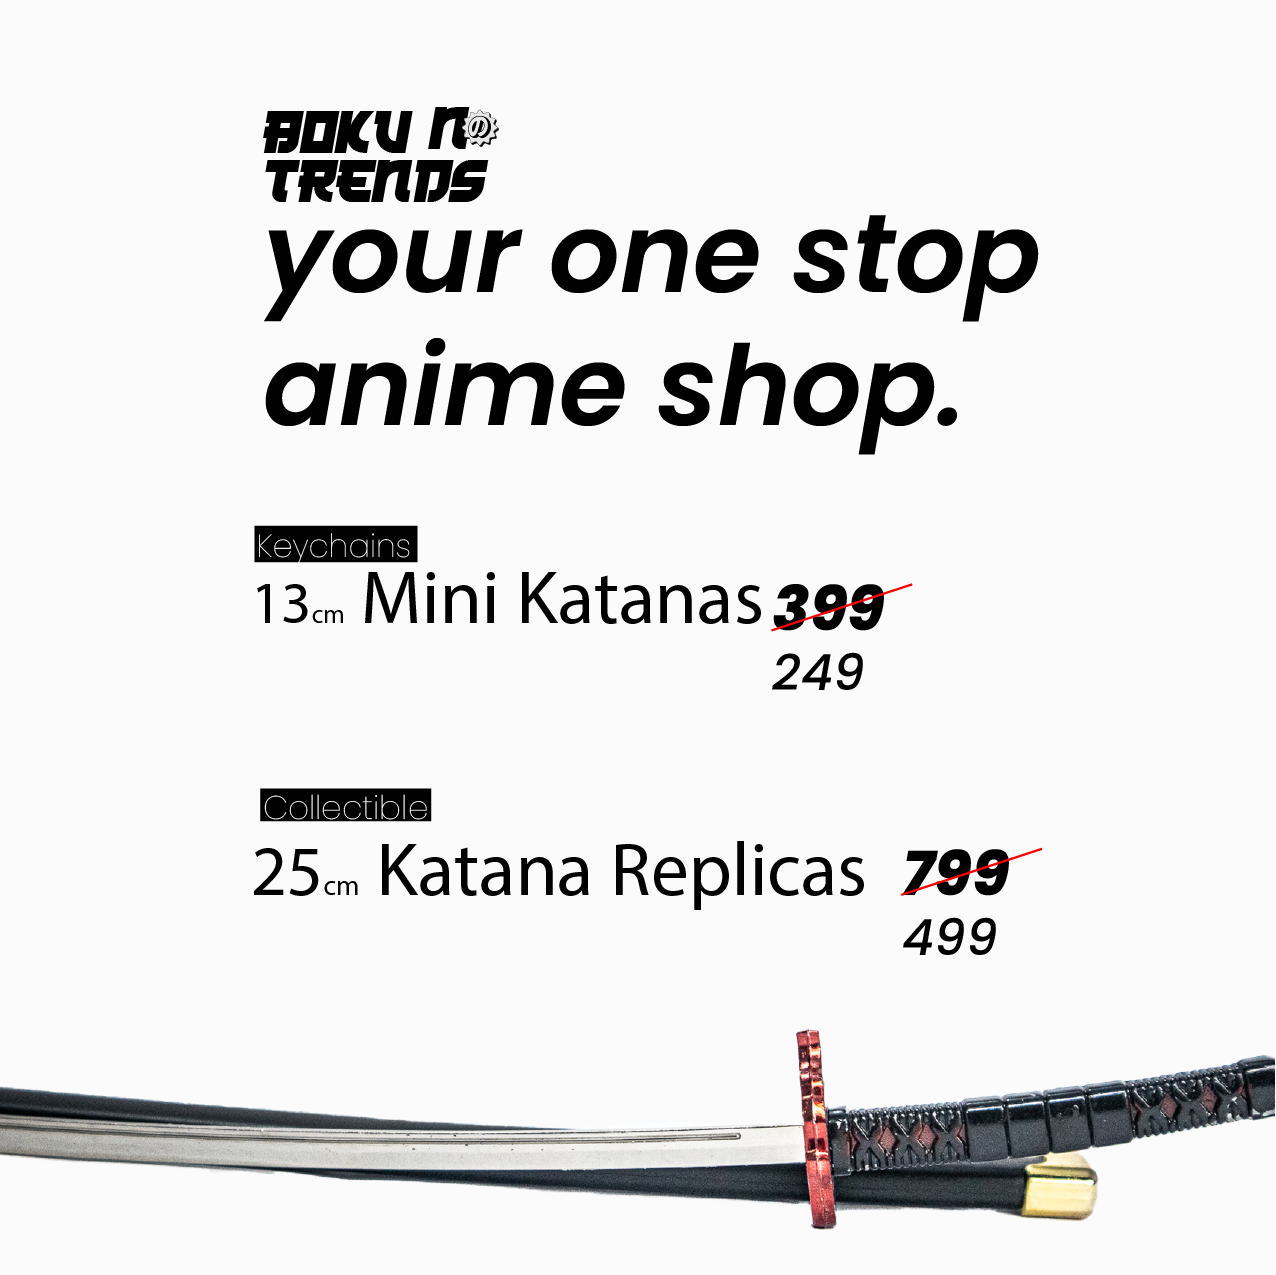 High Quality Anime Katana Replicas Available in Keychains and Collectibles